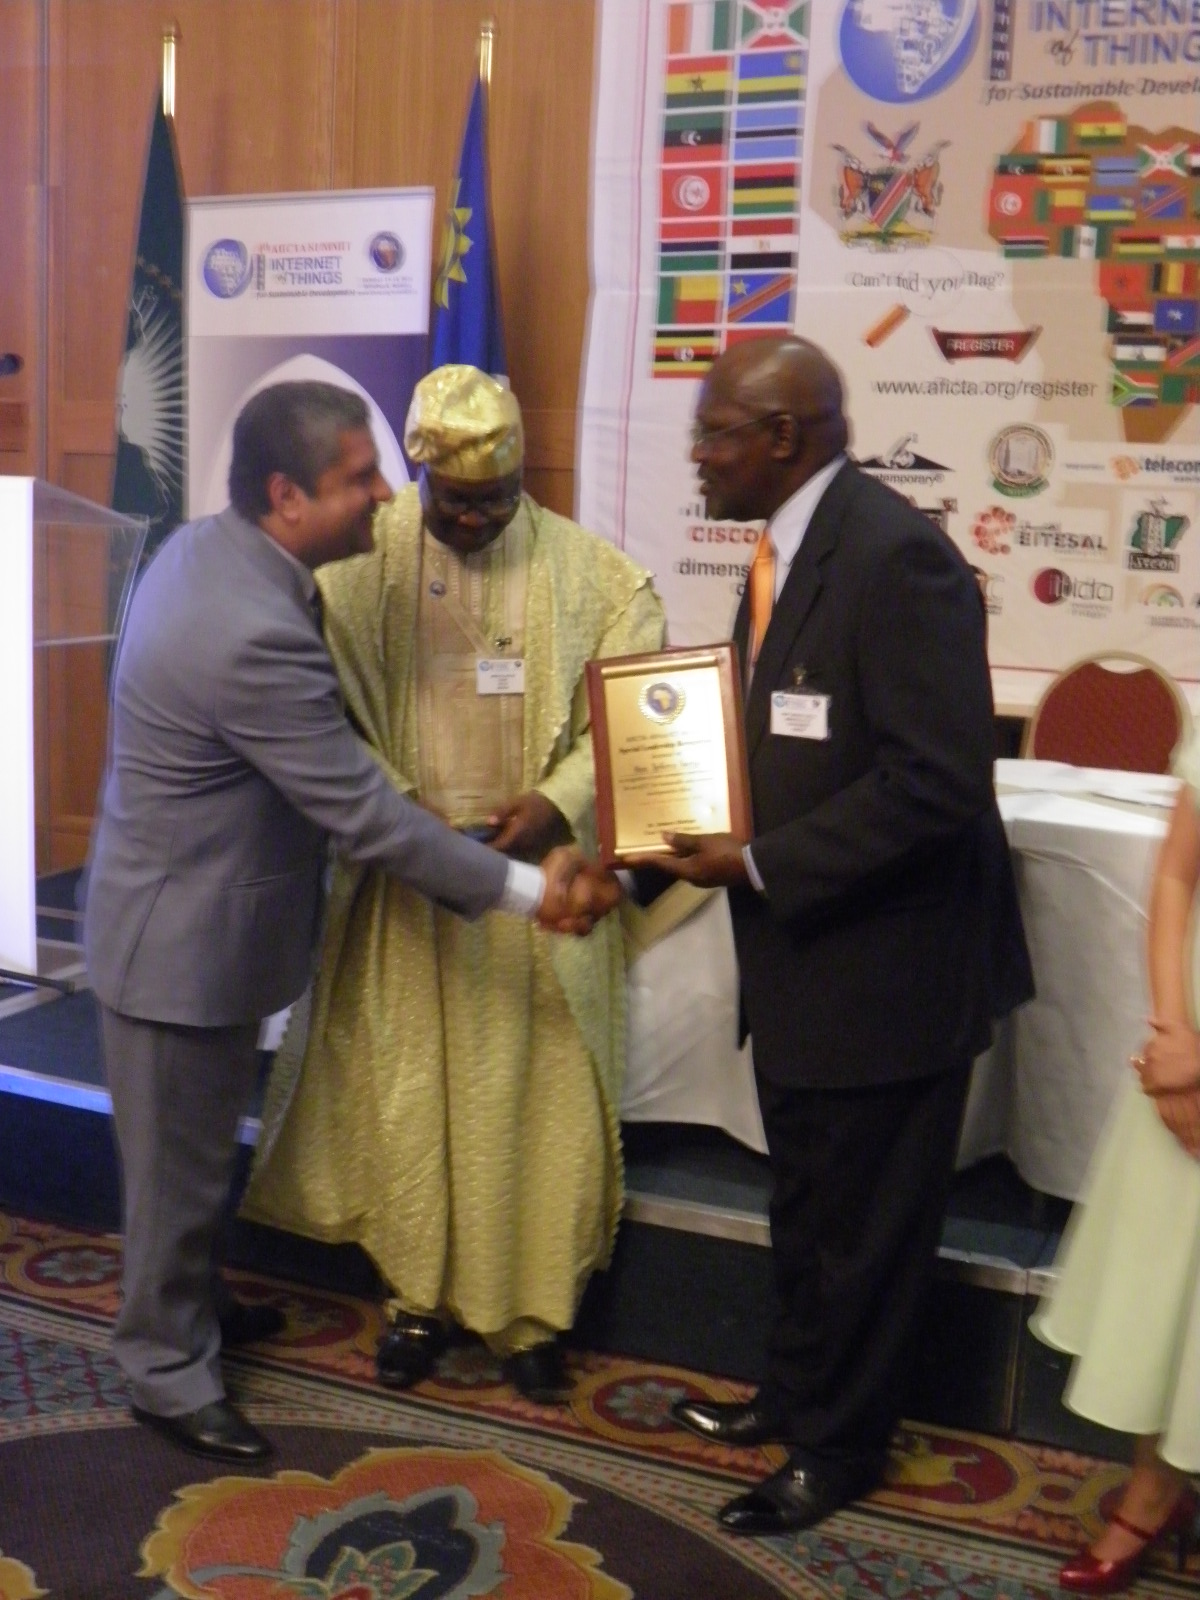 Exchange of Plesantries between Hossam Elgamal of Egyptian Cabinet and Namibian ICT Minister